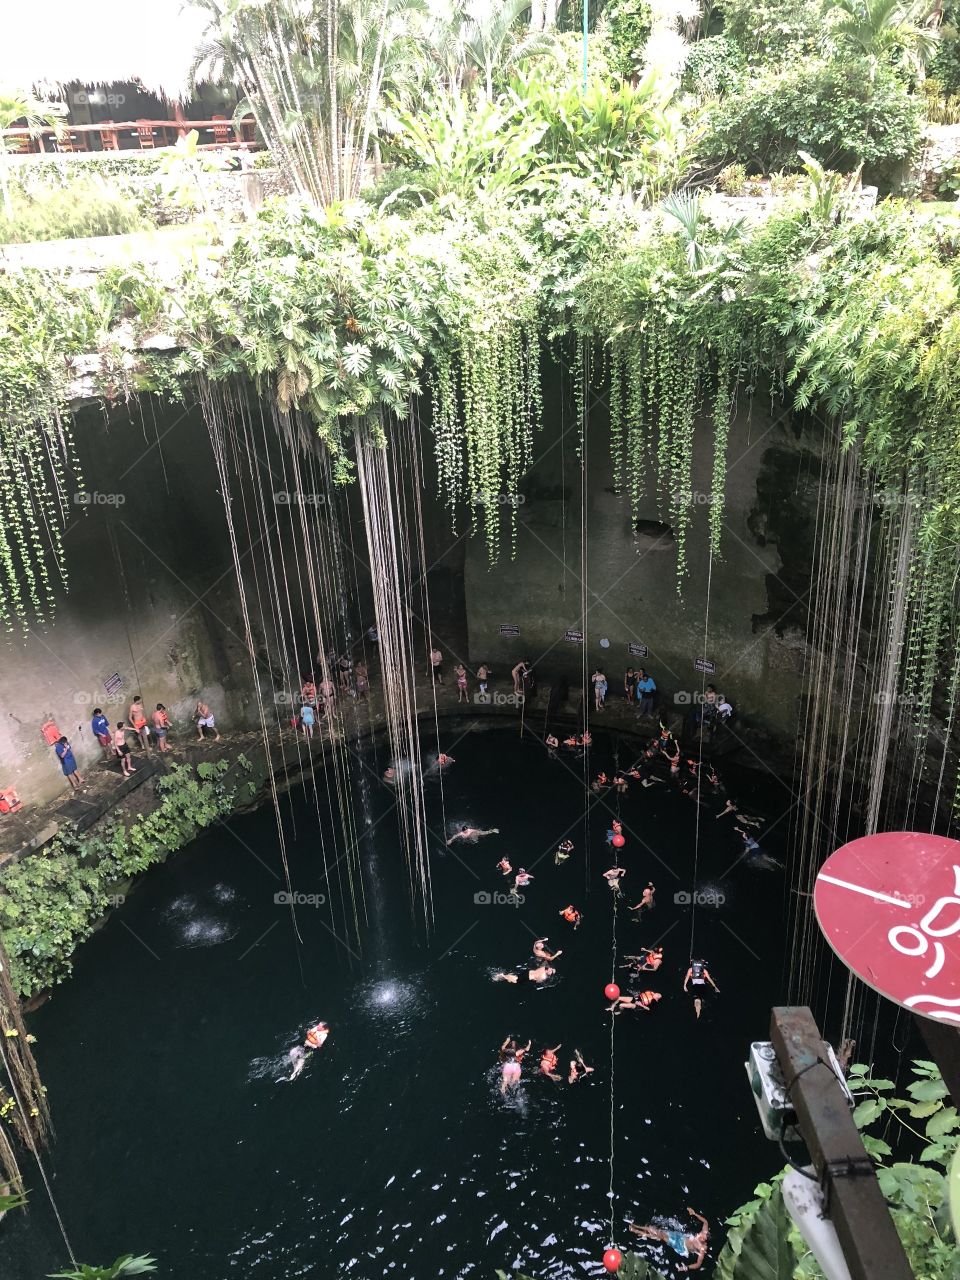 The majestic view of the cenote at Ik Kil  